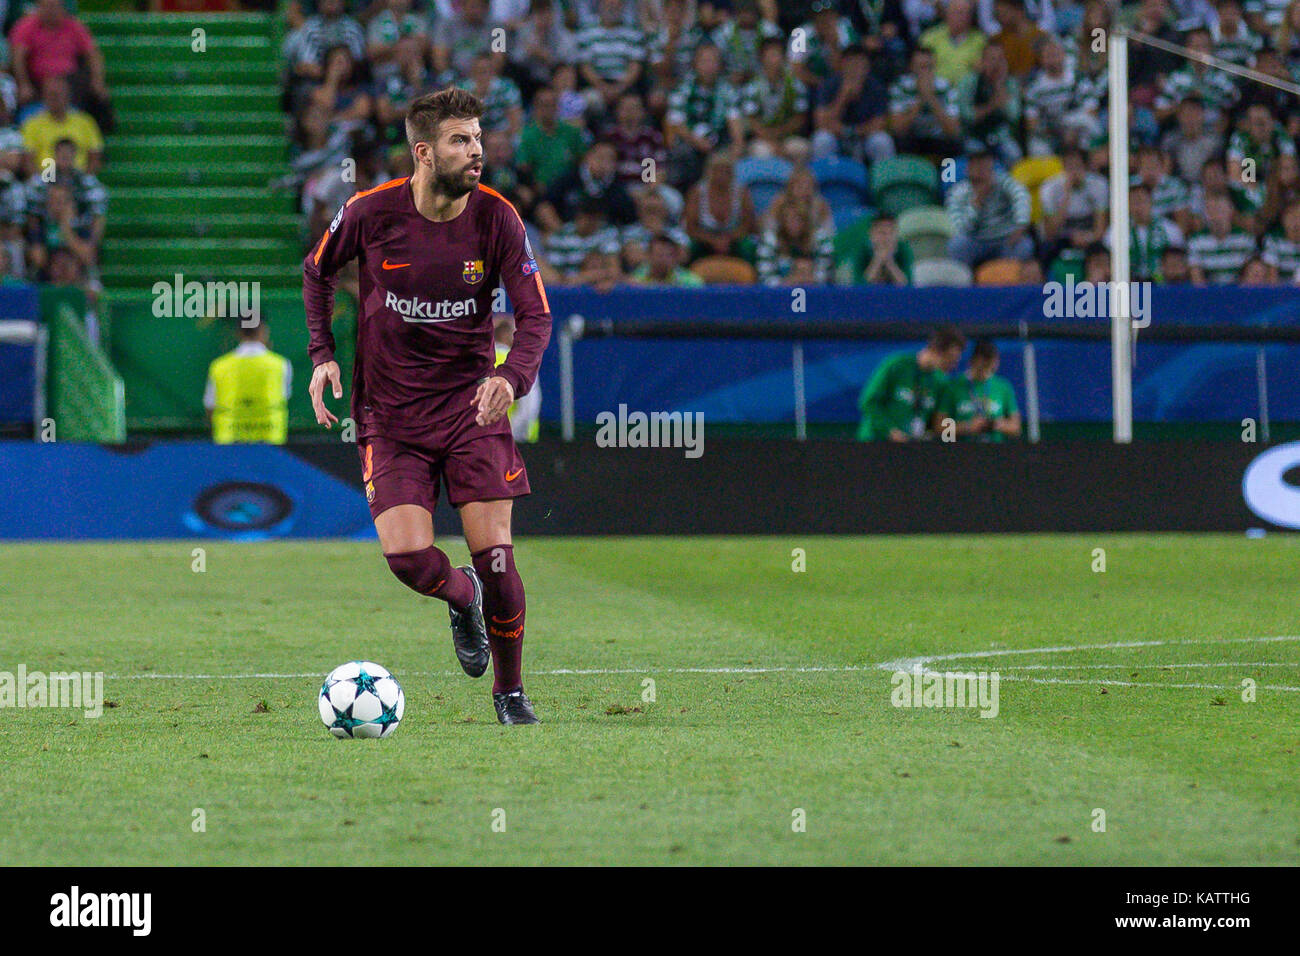 Lisbon, Portugal. 27th Sep, 2017. Barcelona's defender from Spain Gerard Pique (3) during the game of the 2nd round of the UEFA Champions League Group D, Sporting CP v FC Barcelona Credit: Alexandre de Sousa/Alamy Live News Stock Photo